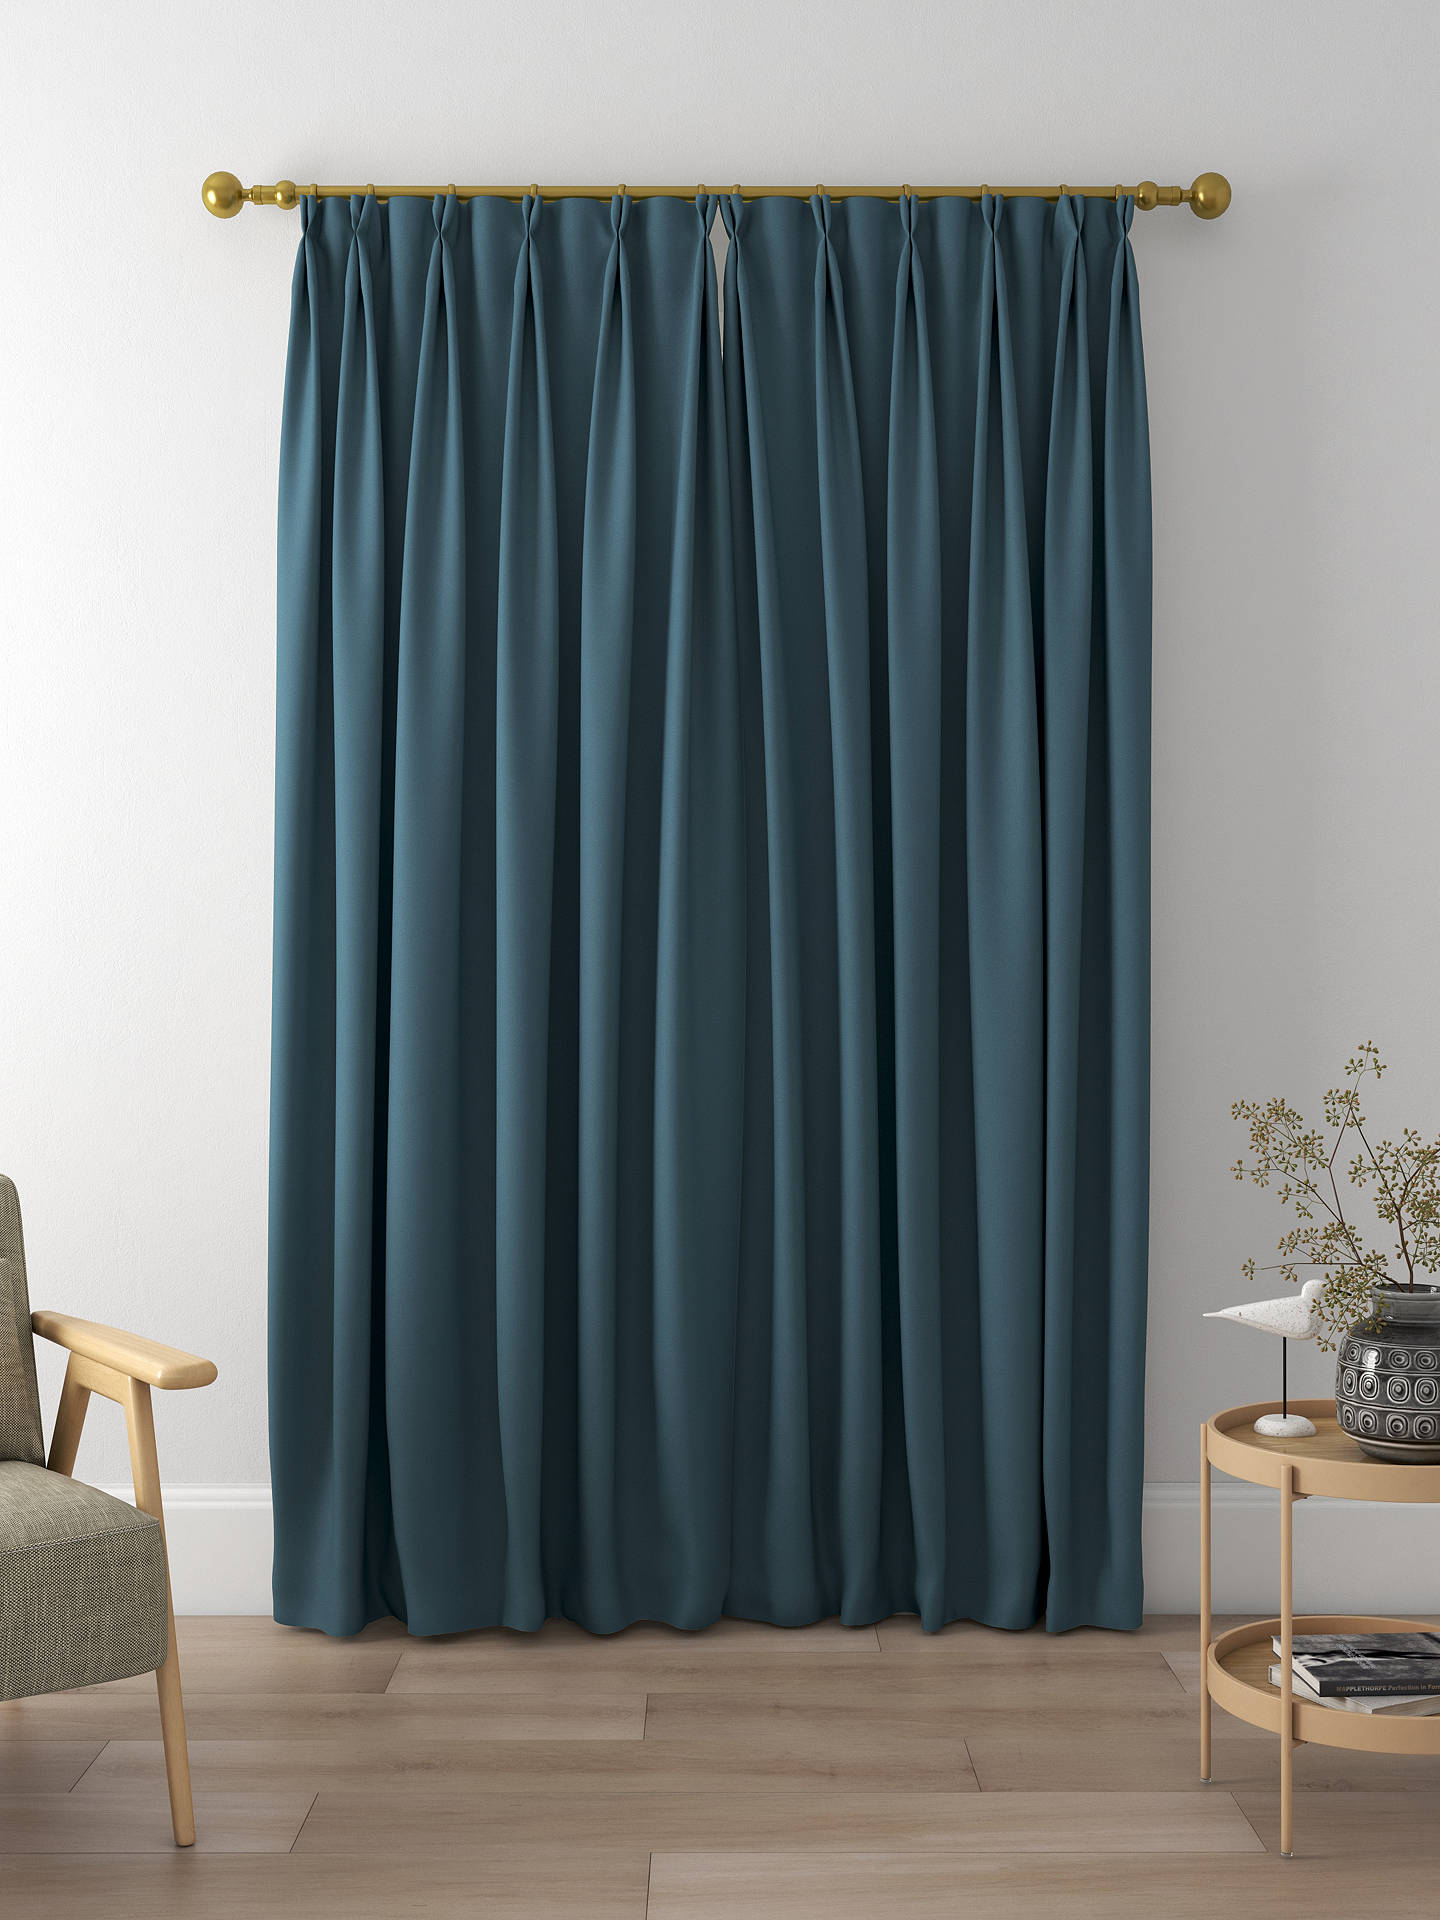 Harlequin Empower Plain Made to Measure Curtains, Riviera